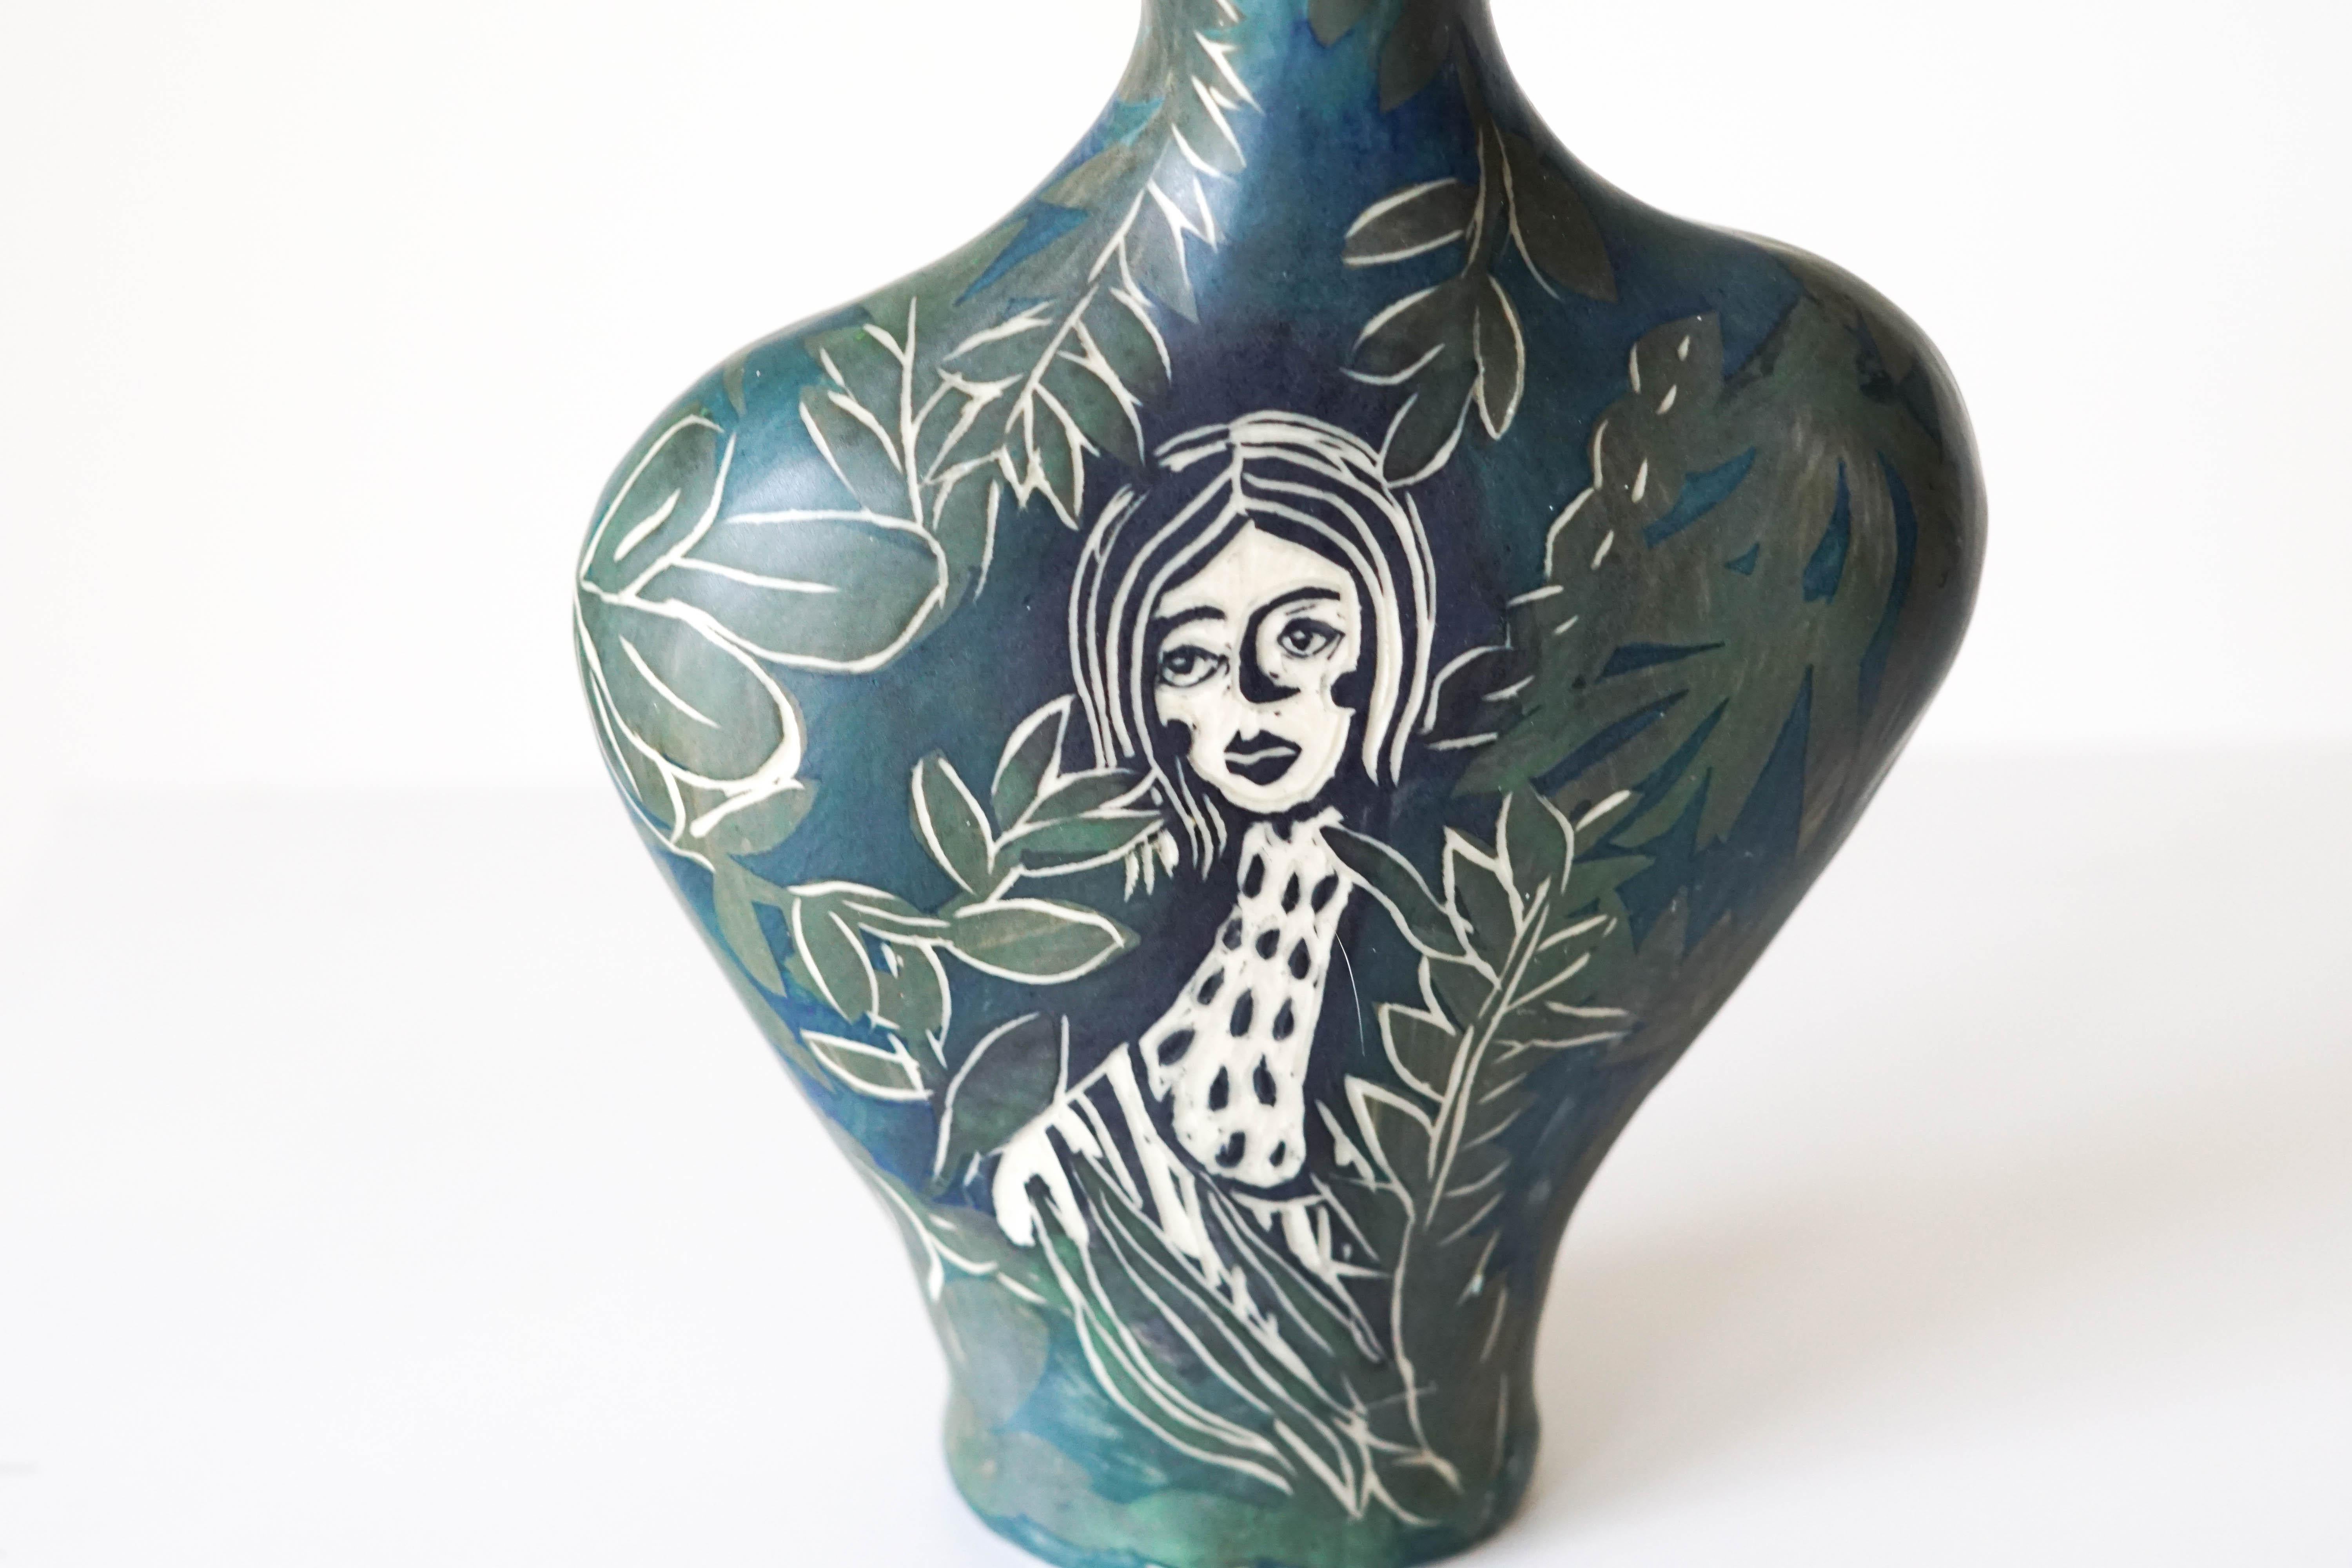 Earth needs us both
Porcelain vase with underglaze Sgraffito detailing.

This vase is a derivative of my Portrait collection; the vase features a woman on each side, one with a fire at her throat, and the other with a pattern, which may be